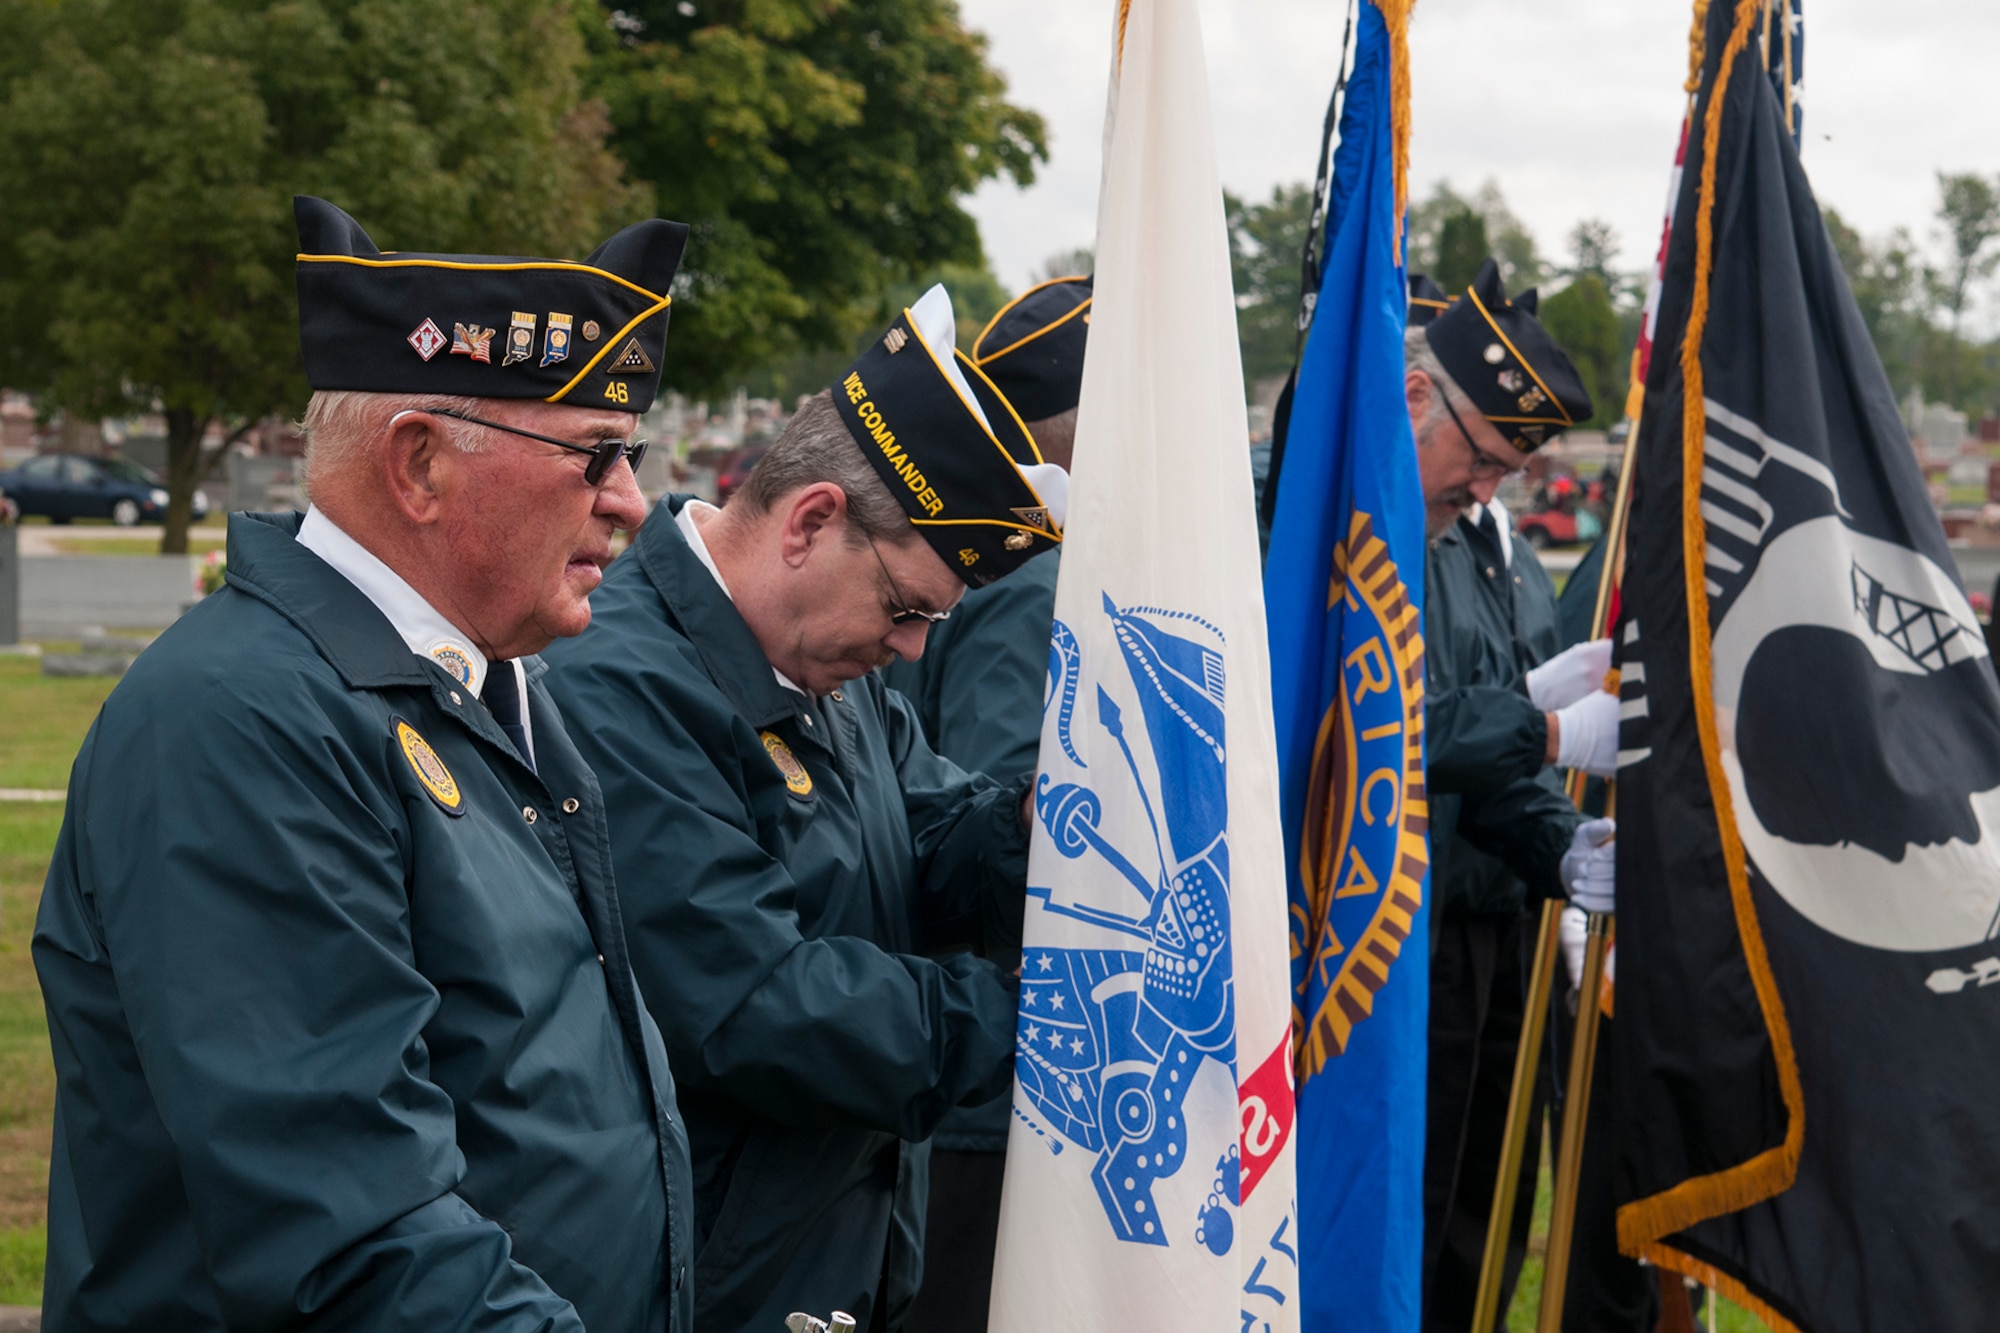 Members of American Legion Post 46 prepare for a ceremony to honor a World War II veteran in Tipton, Ind., Sept. 29, 2016. The ceremony was held to honor Army Air Corps Lt. Robert McIntosh, 27th Fighter Squadron pilot, whose plane crashed in 1942 and his remains we recently recovered. (U.S. Air Force photo/Staff Sgt. Dakota Bergl)